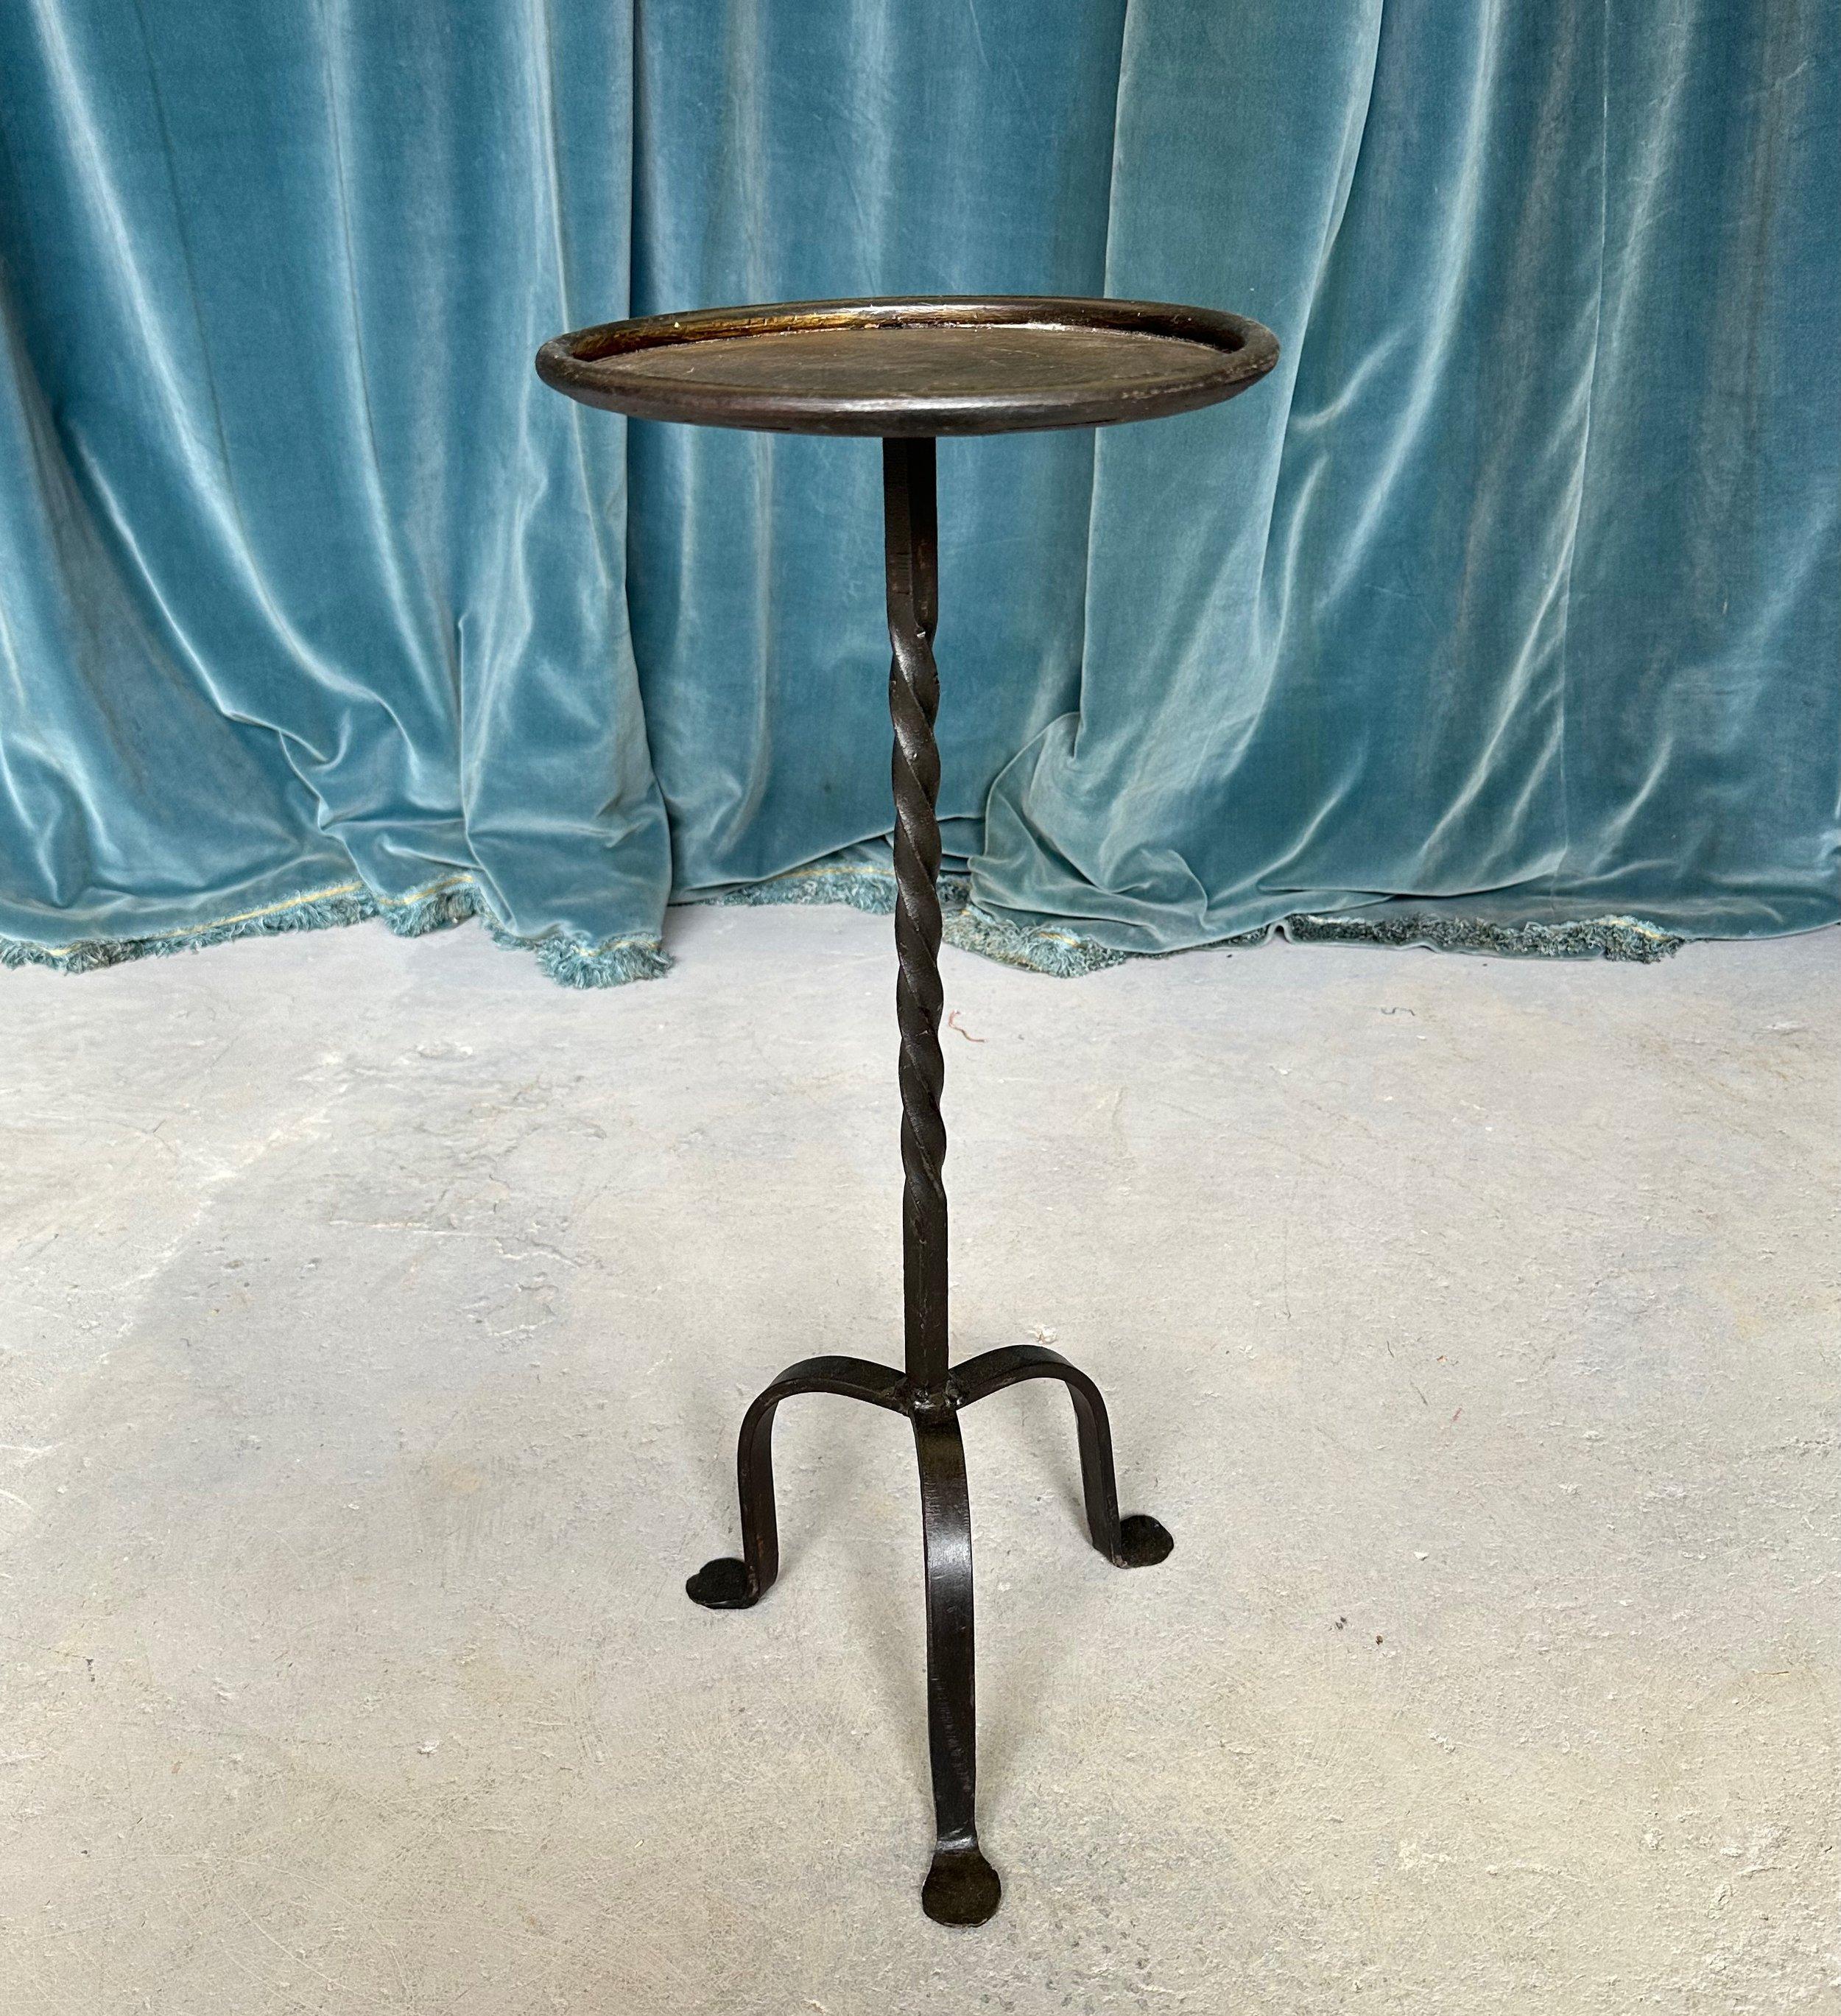 This striking Spanish drinks table was recently crafted by accomplished European artisans using traditional iron-working methods. Based on one of our favorite 1950s designs, the table has a sturdy tripod base and a twisted stem that adds visual